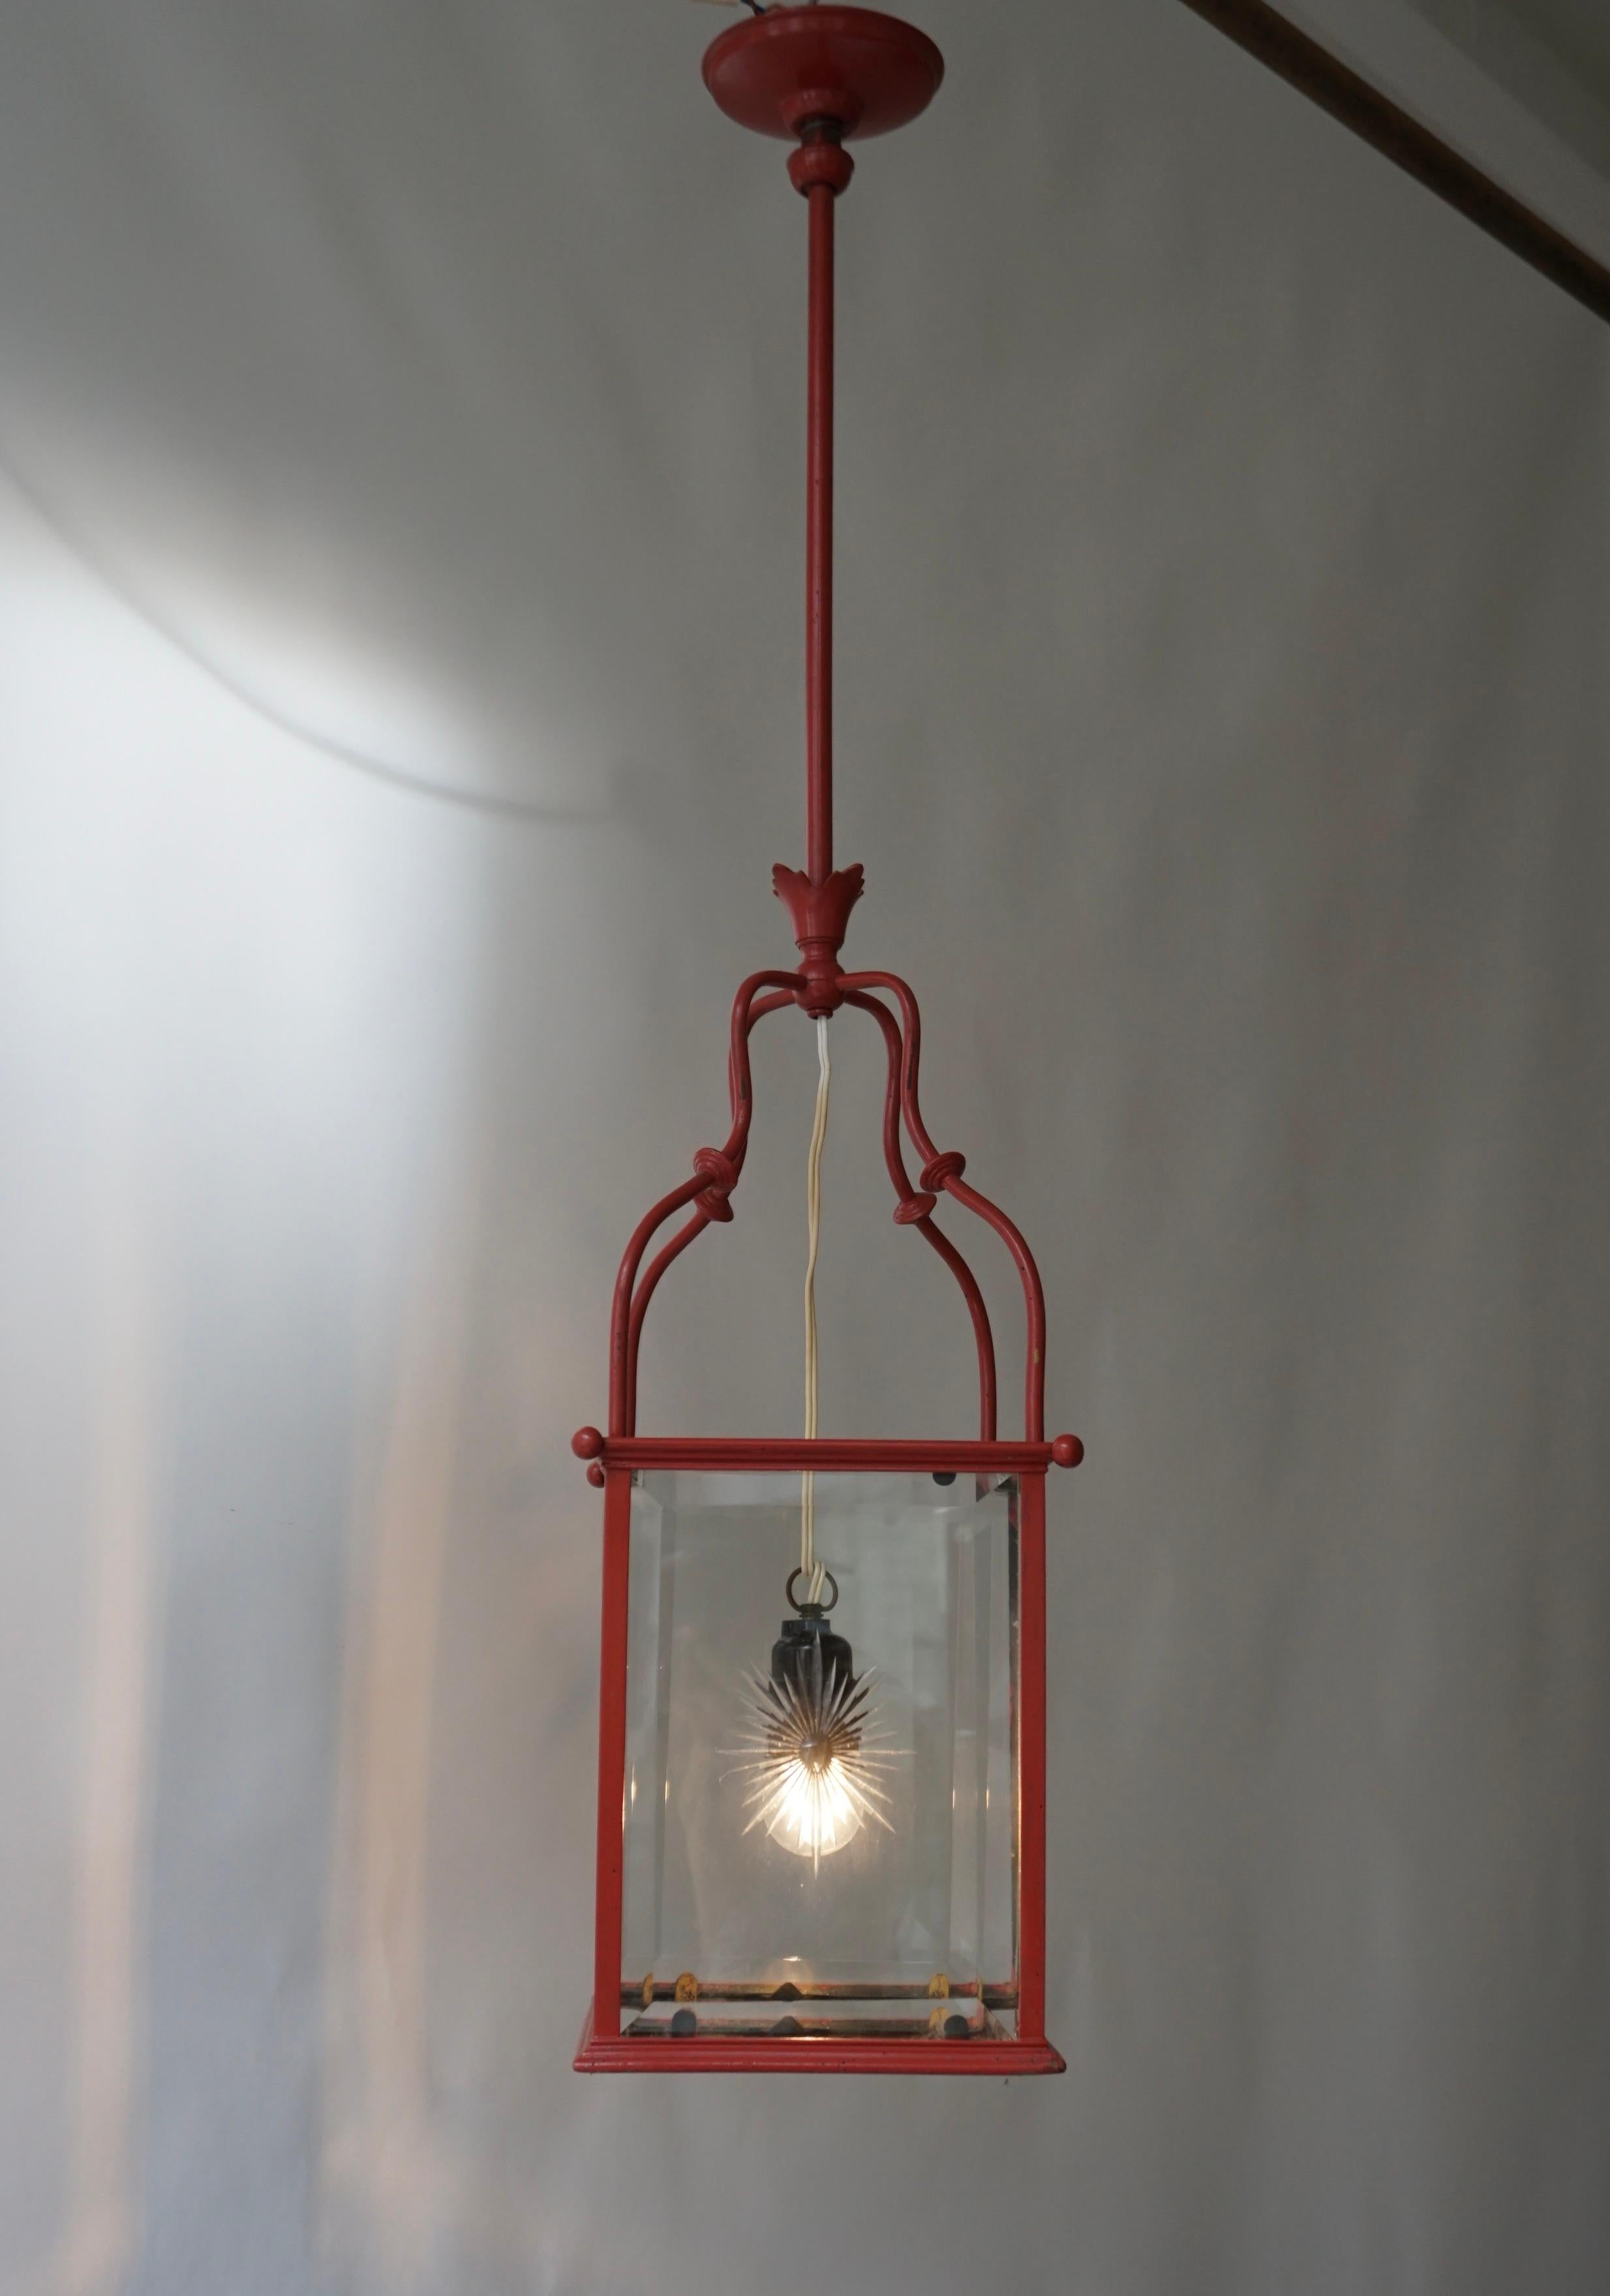 An Italian Red Tole Metal Lantern with Cut Glass, Early 20th C. For Sale 6